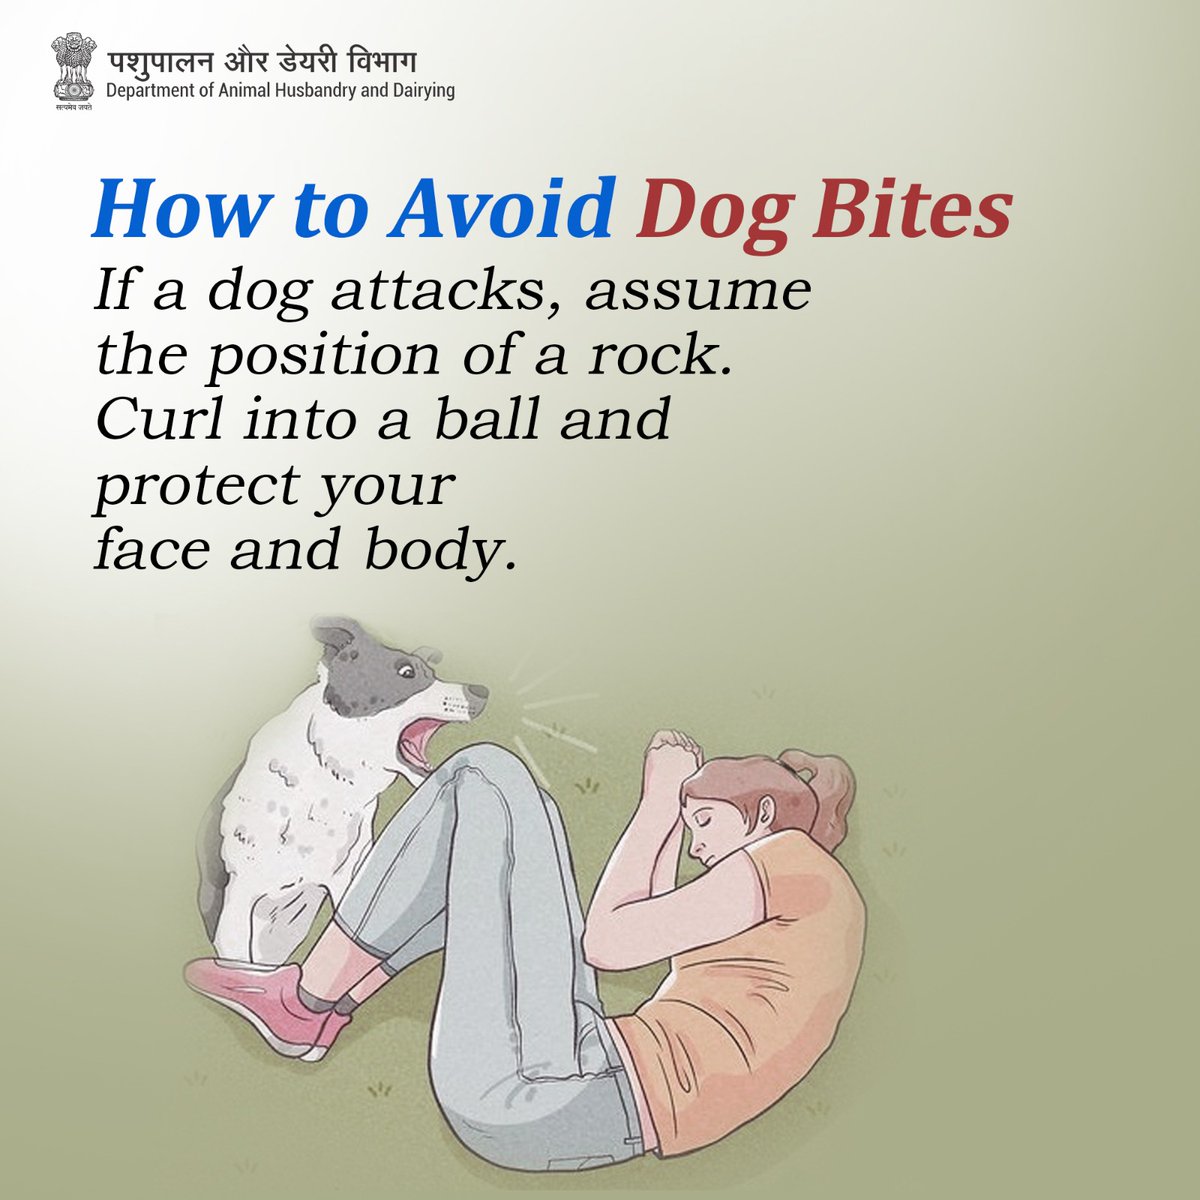 Stay safe: If attacked, become a rock—curl up and shield yourself. #DogSafety #PreventRabies #VaccinateNow